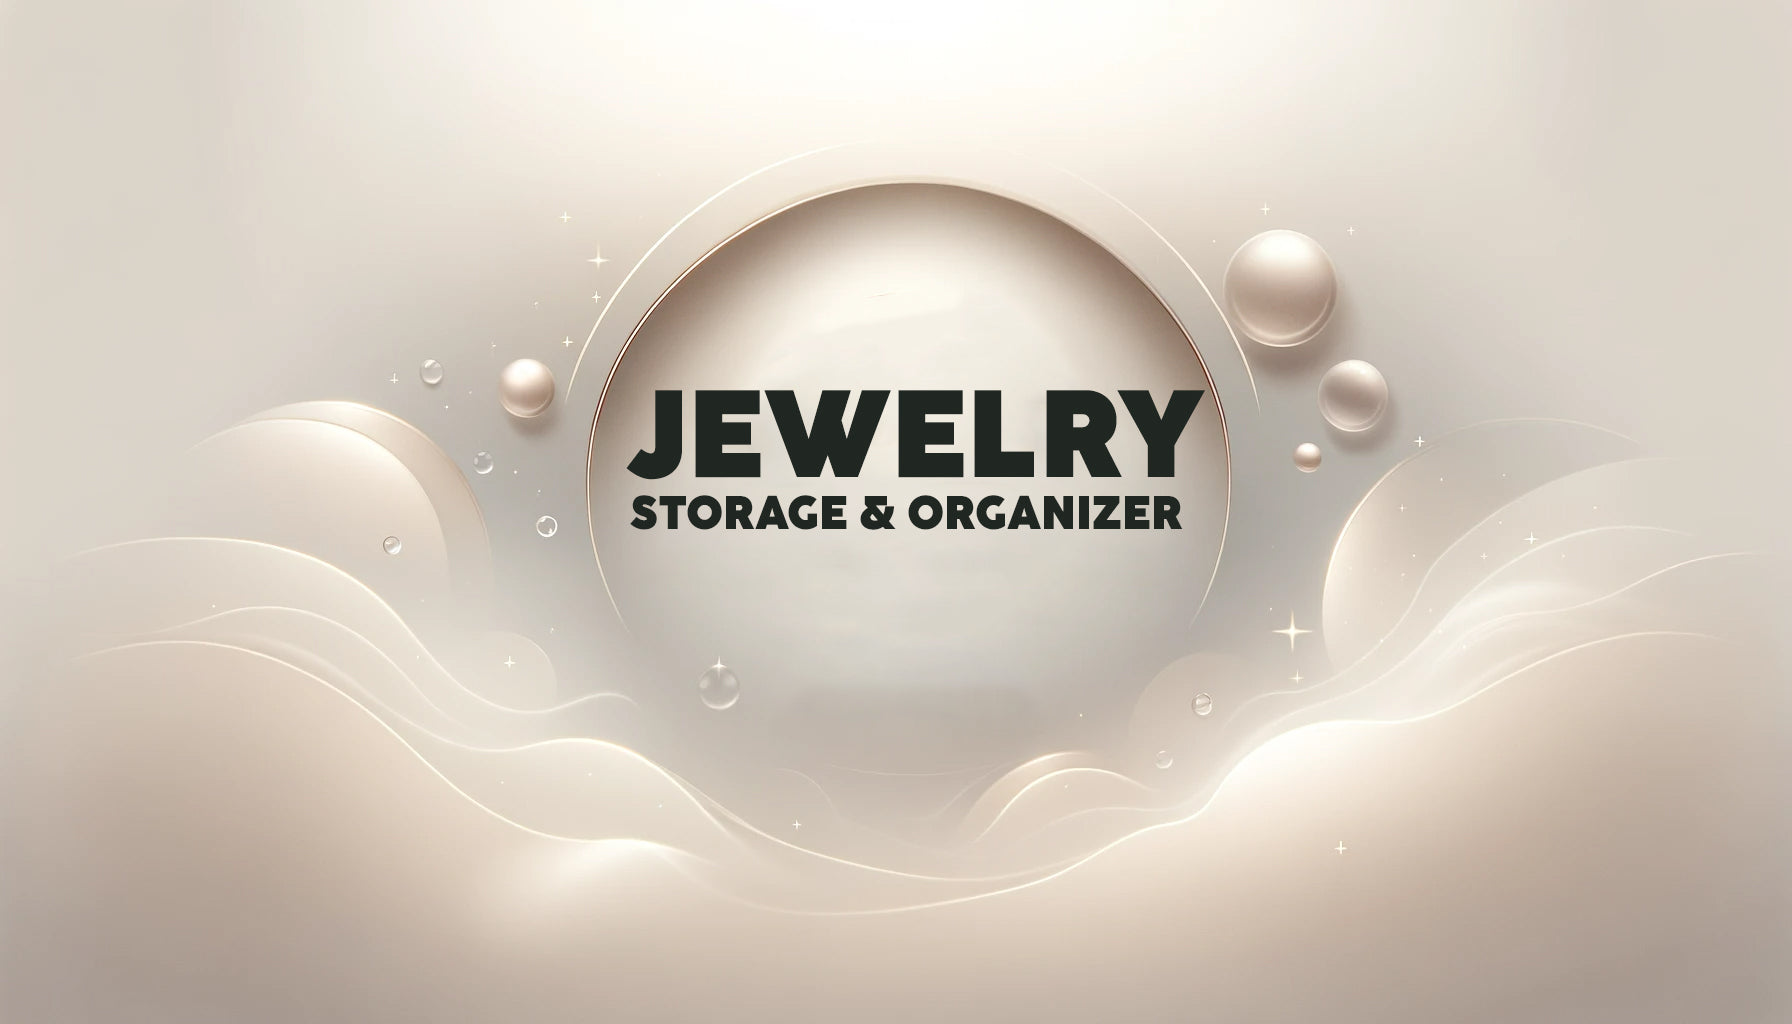 Elegant Jewelry Storage and Organizers - Secure &amp; Stylish Solutions for Your Treasures"